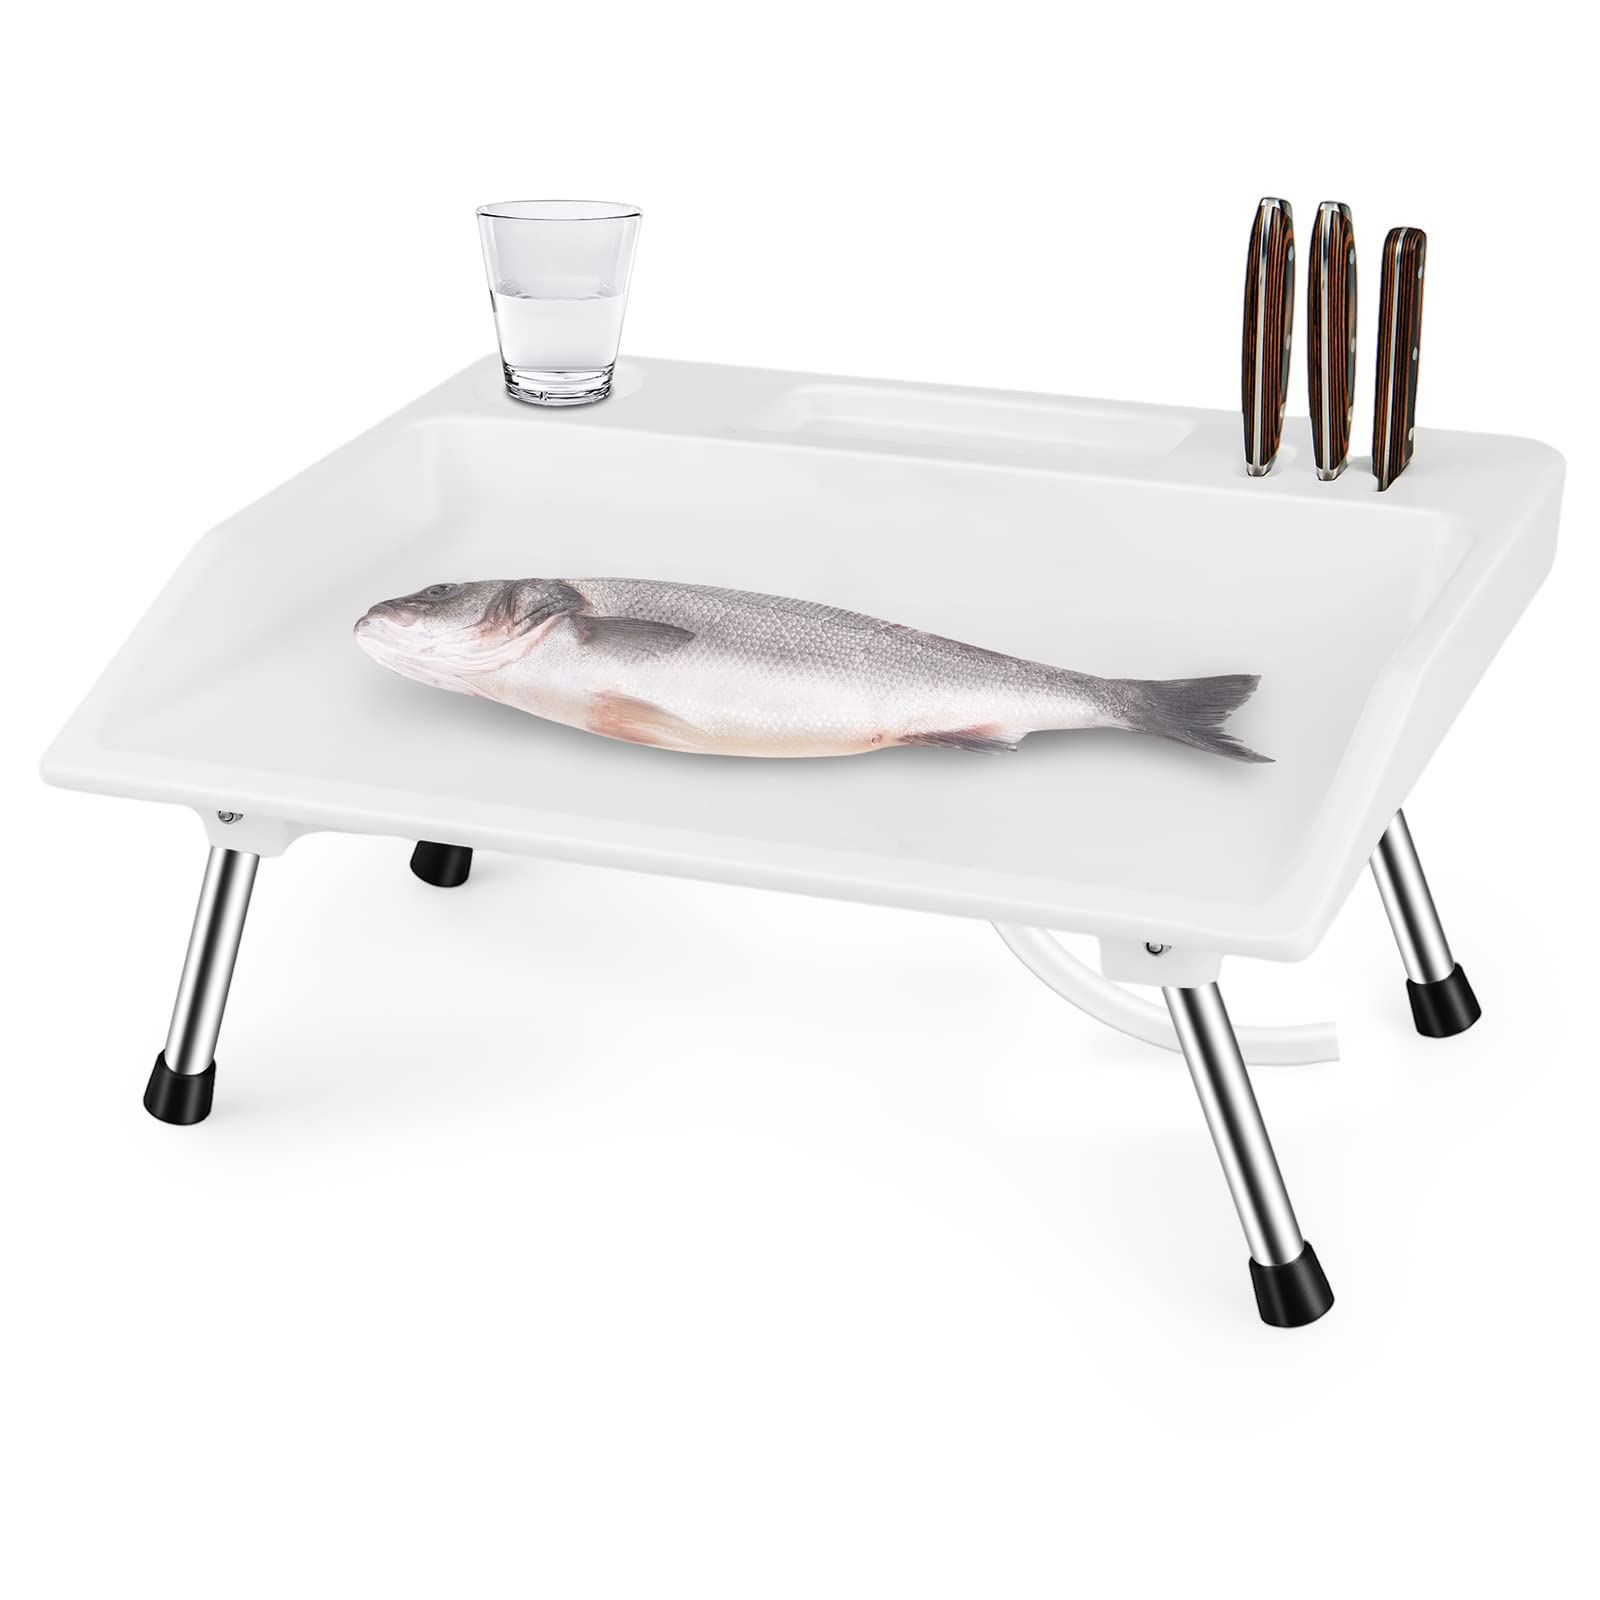 Giantex Small Folding Fish Cleaning Table with Knife Groove